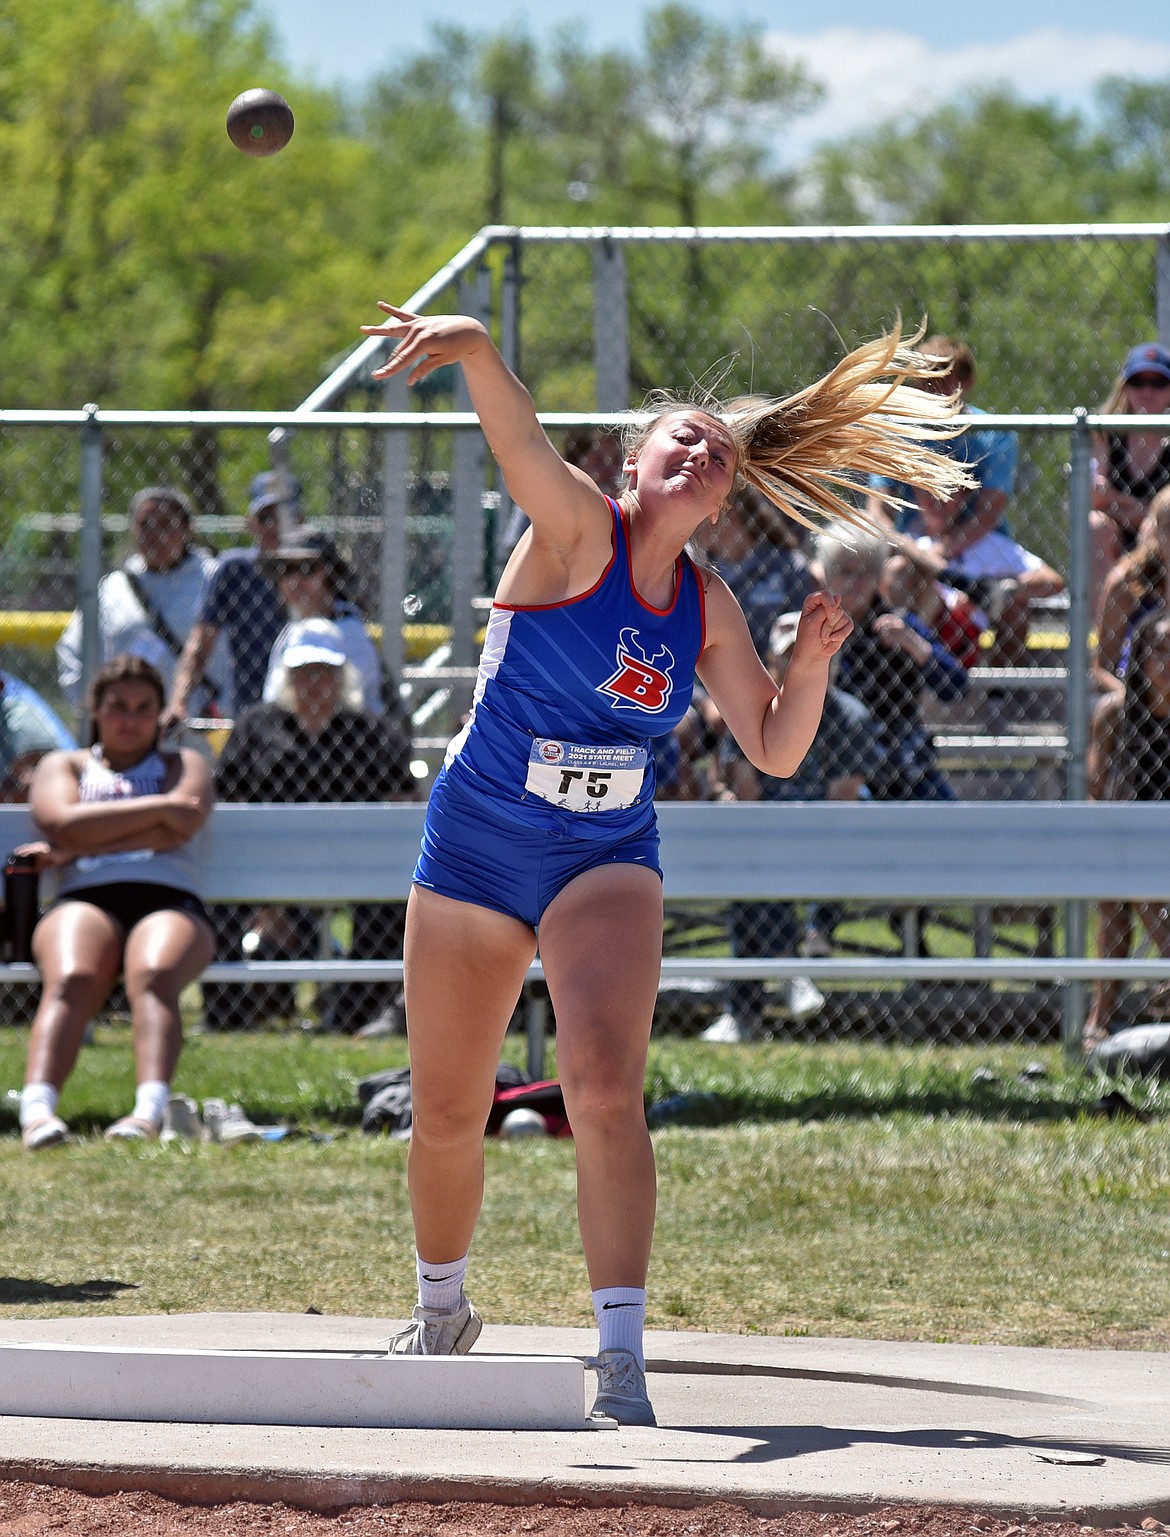 Scout Nadeau threw a personal best 37 feet, 1.25 inches to finish fourth in the shot put at the state track meet in Laurel Saturday.
Whitney England/For the Eagle